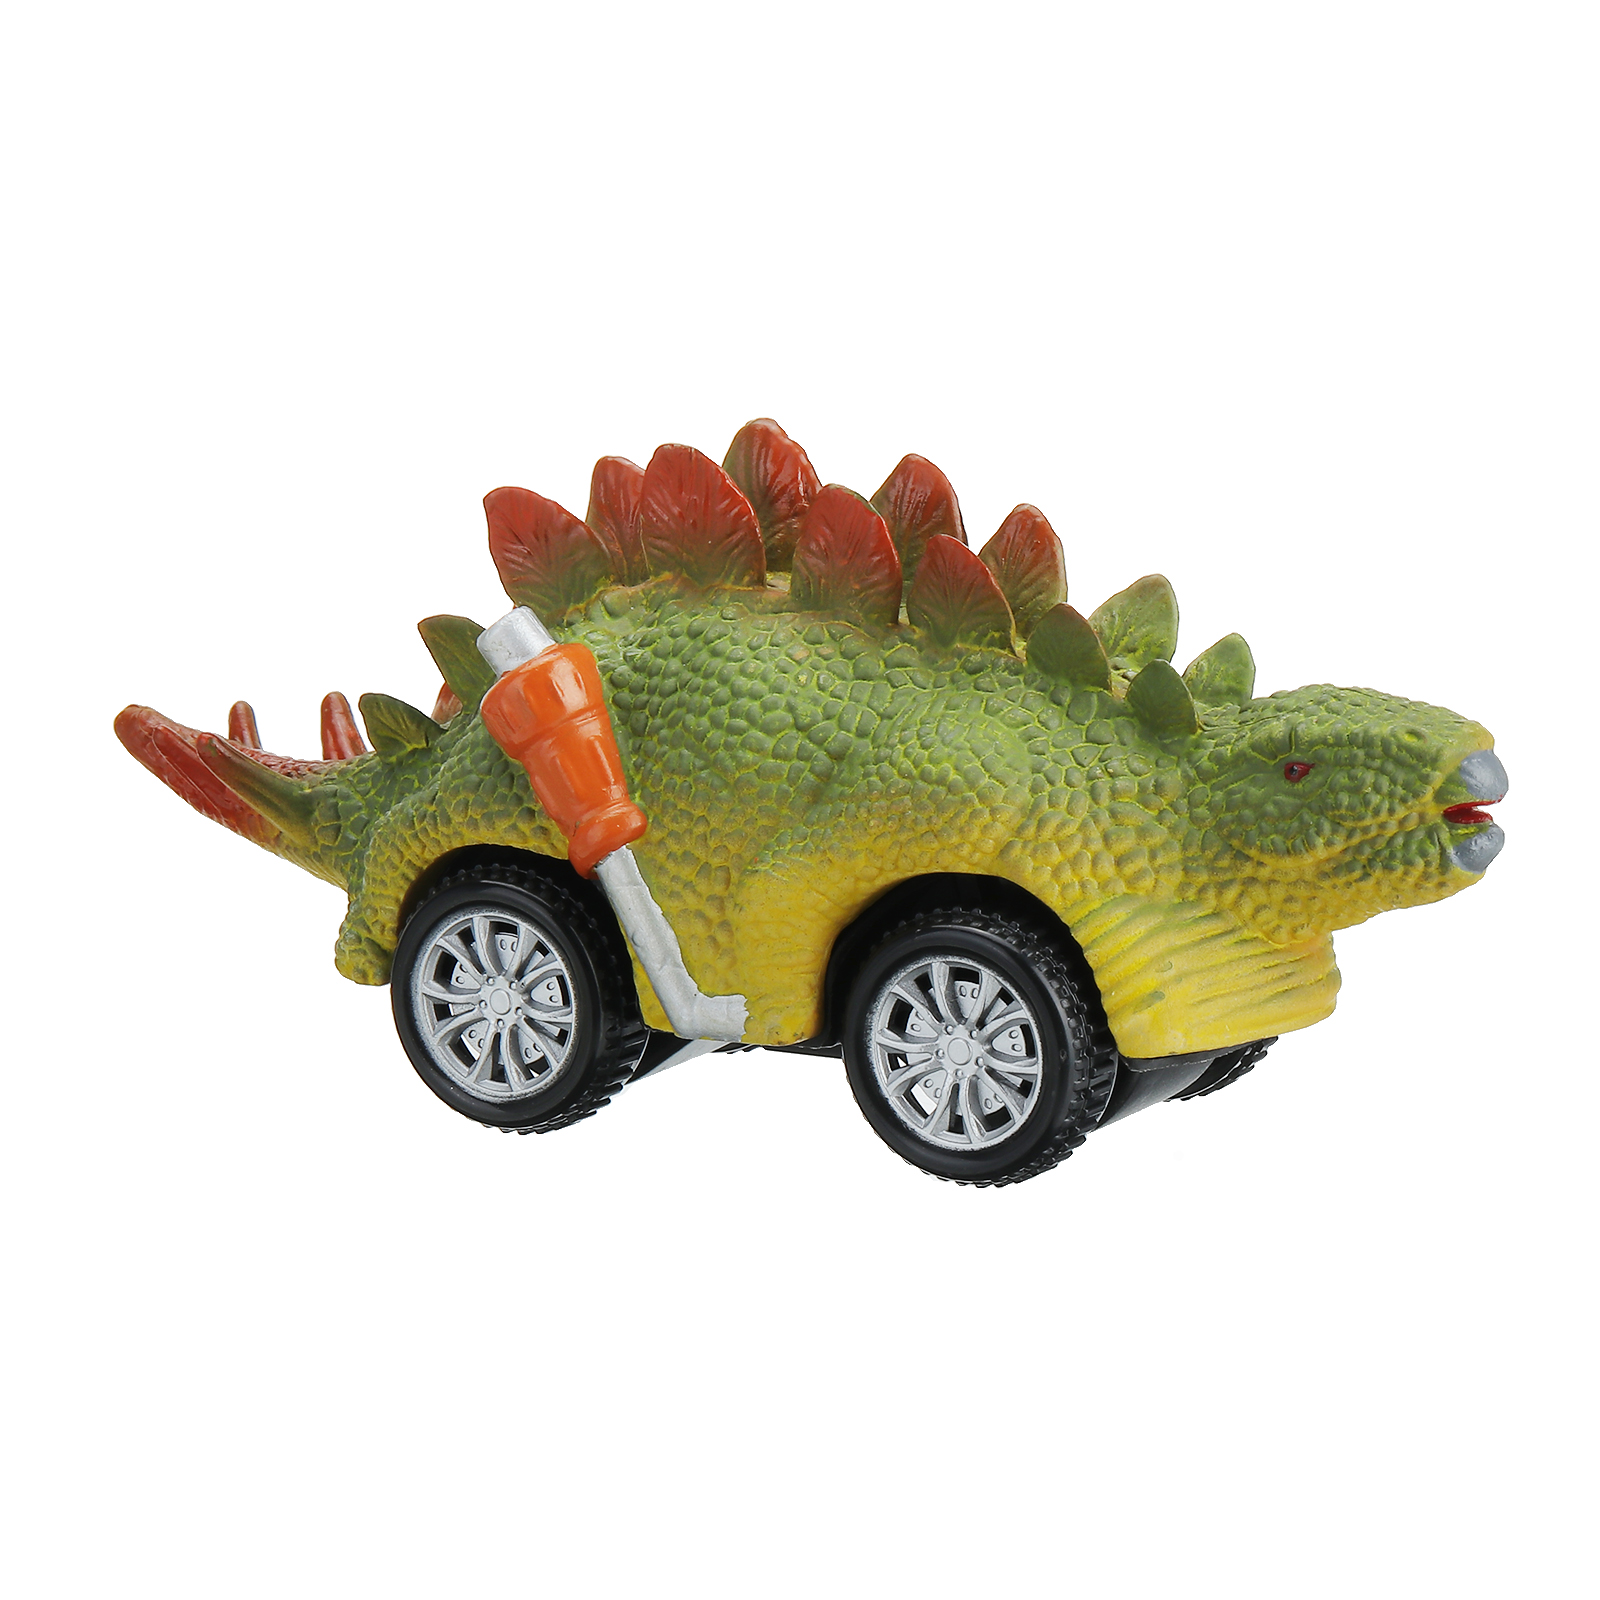 Pickwoo-Dinosaur-Toys-Cars-Inertia-Vehicles-Toddlers-Kids-Dinosaur-Party-Games-with-T-Rex-Dino-Toys--1895631-12